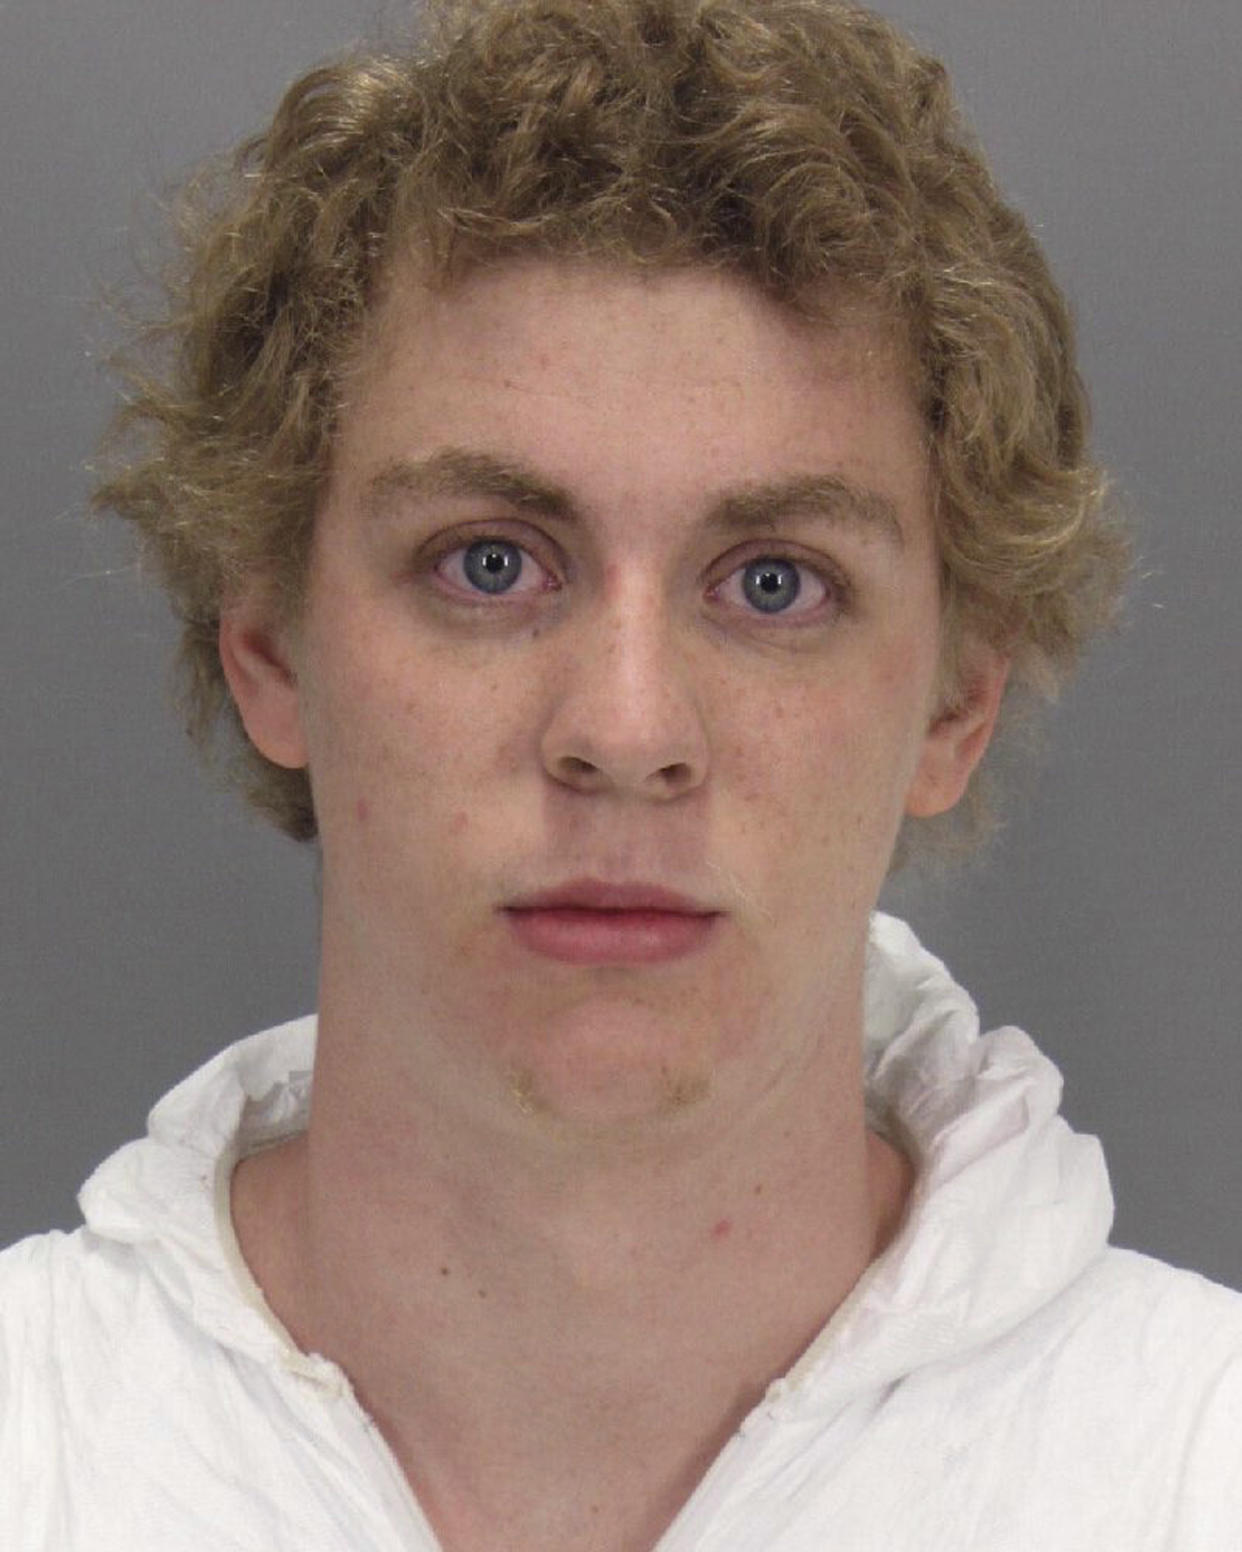 Brock Turner was convicted of three counts of sexual assault in March 2016 in a case that drew national attention for his six-month sentence. He is appealing his conviction, with legal documents filed Dec. 1. (Photo: Santa Clara County Sheriff’s Office via AP)